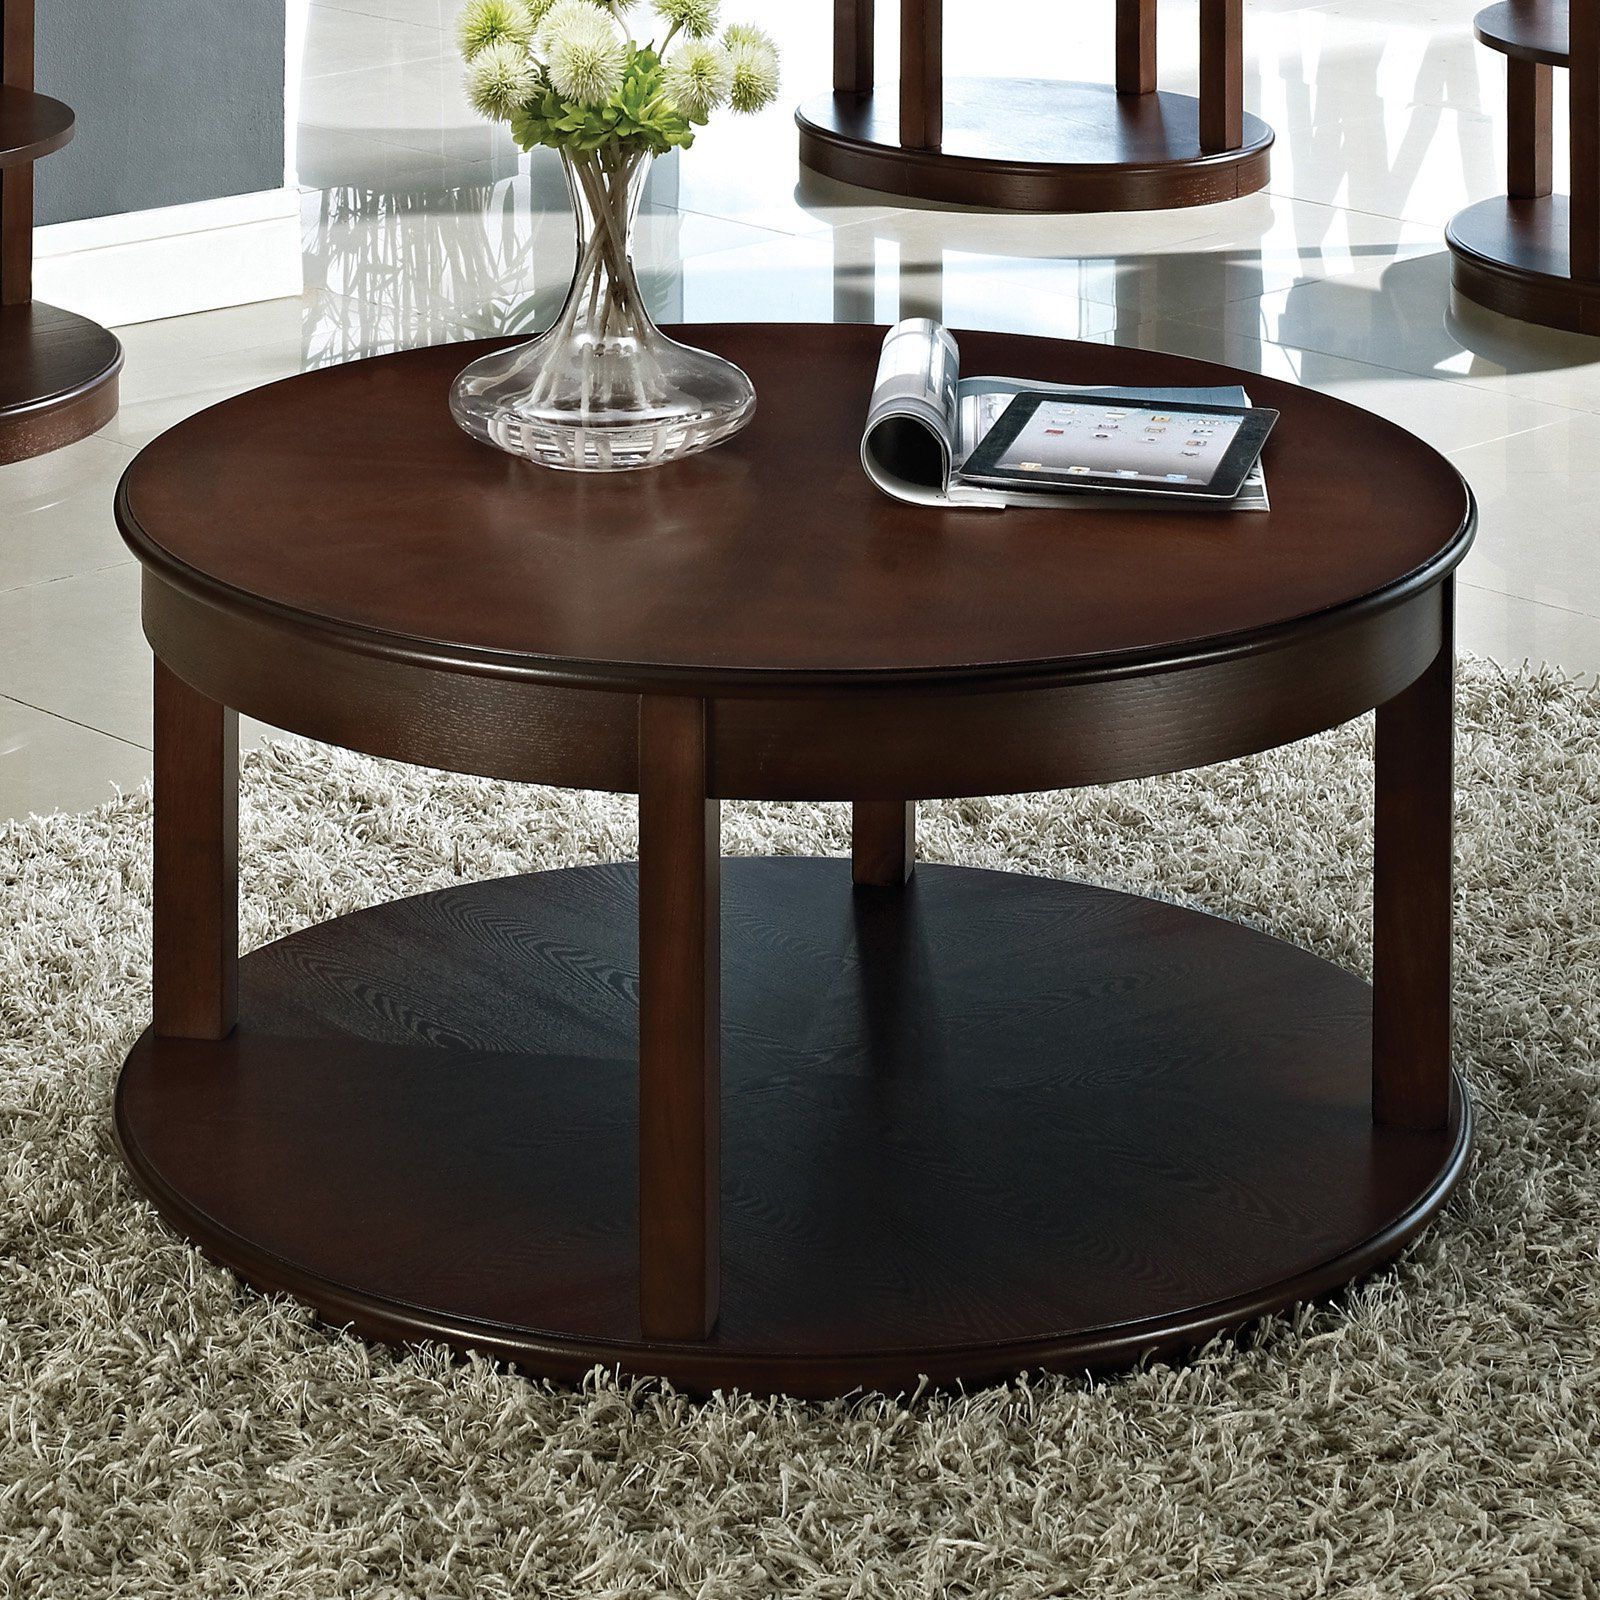 Most Recent Espresso Wood Finish Coffee Tables Pertaining To Have To Have It (View 7 of 15)